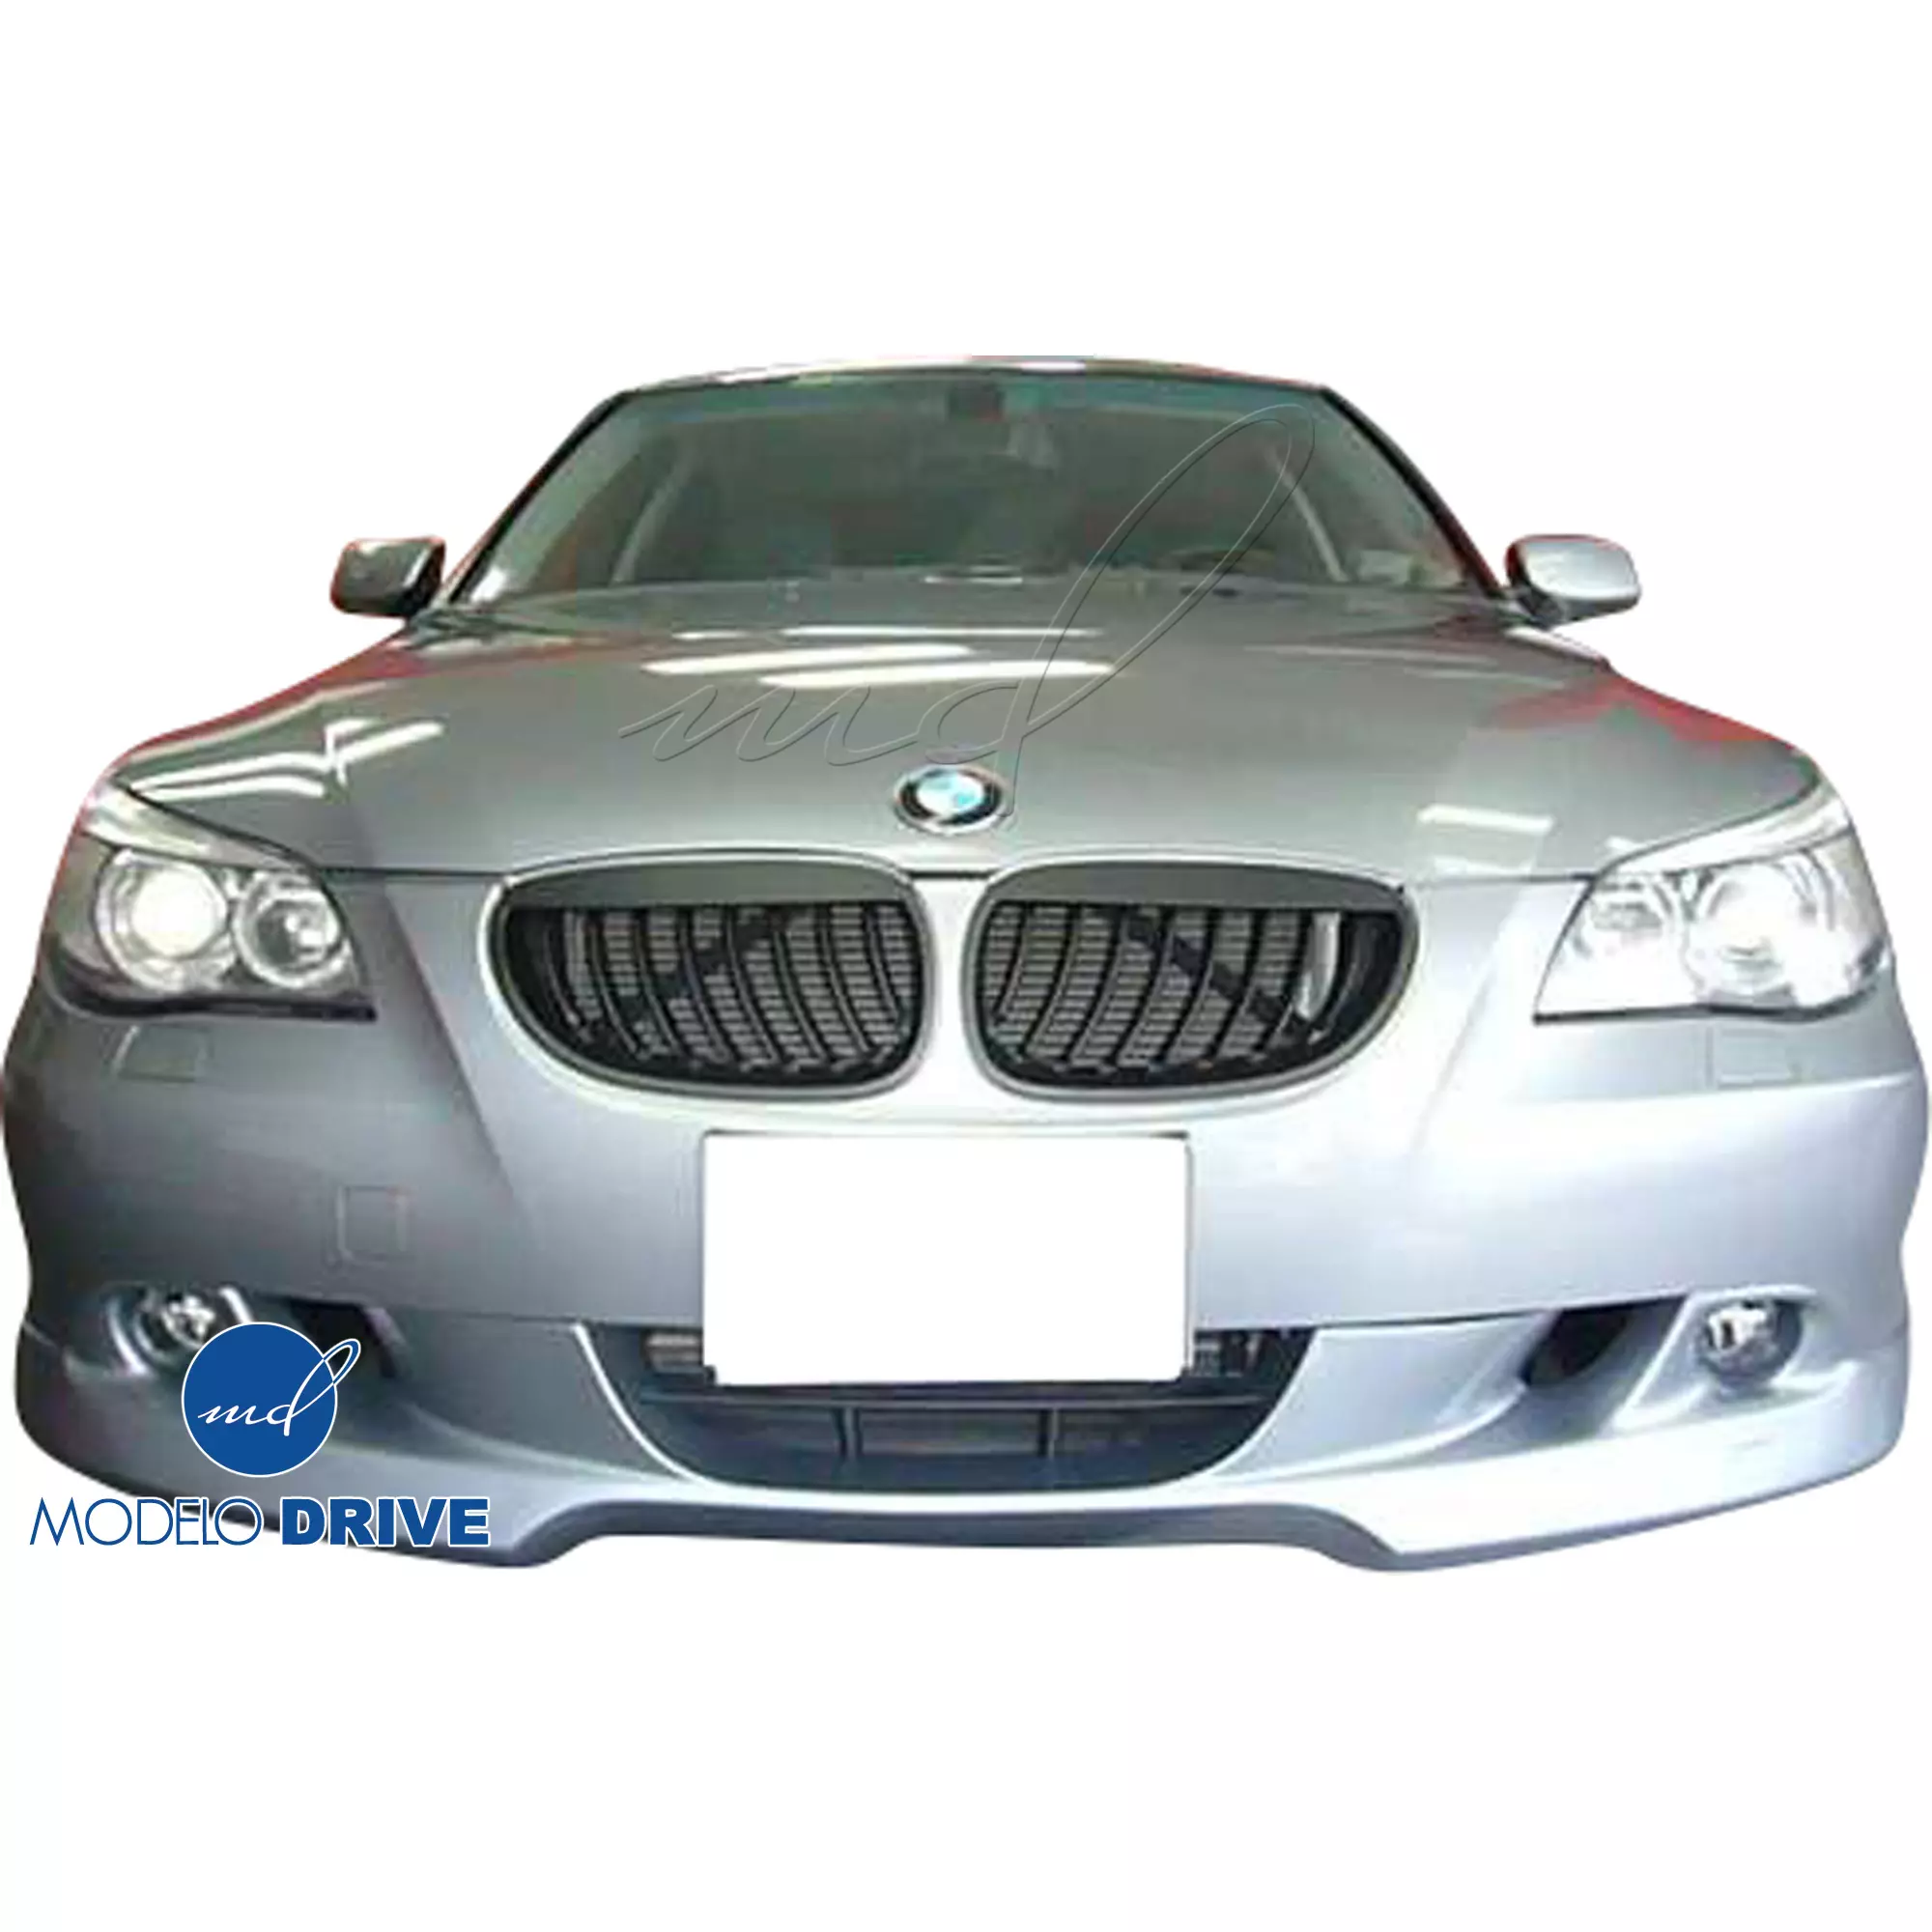 ModeloDrive FRP ASCH Front Valance Add-on > BMW 5-Series E60 2004-2010 > 4dr - Image 4